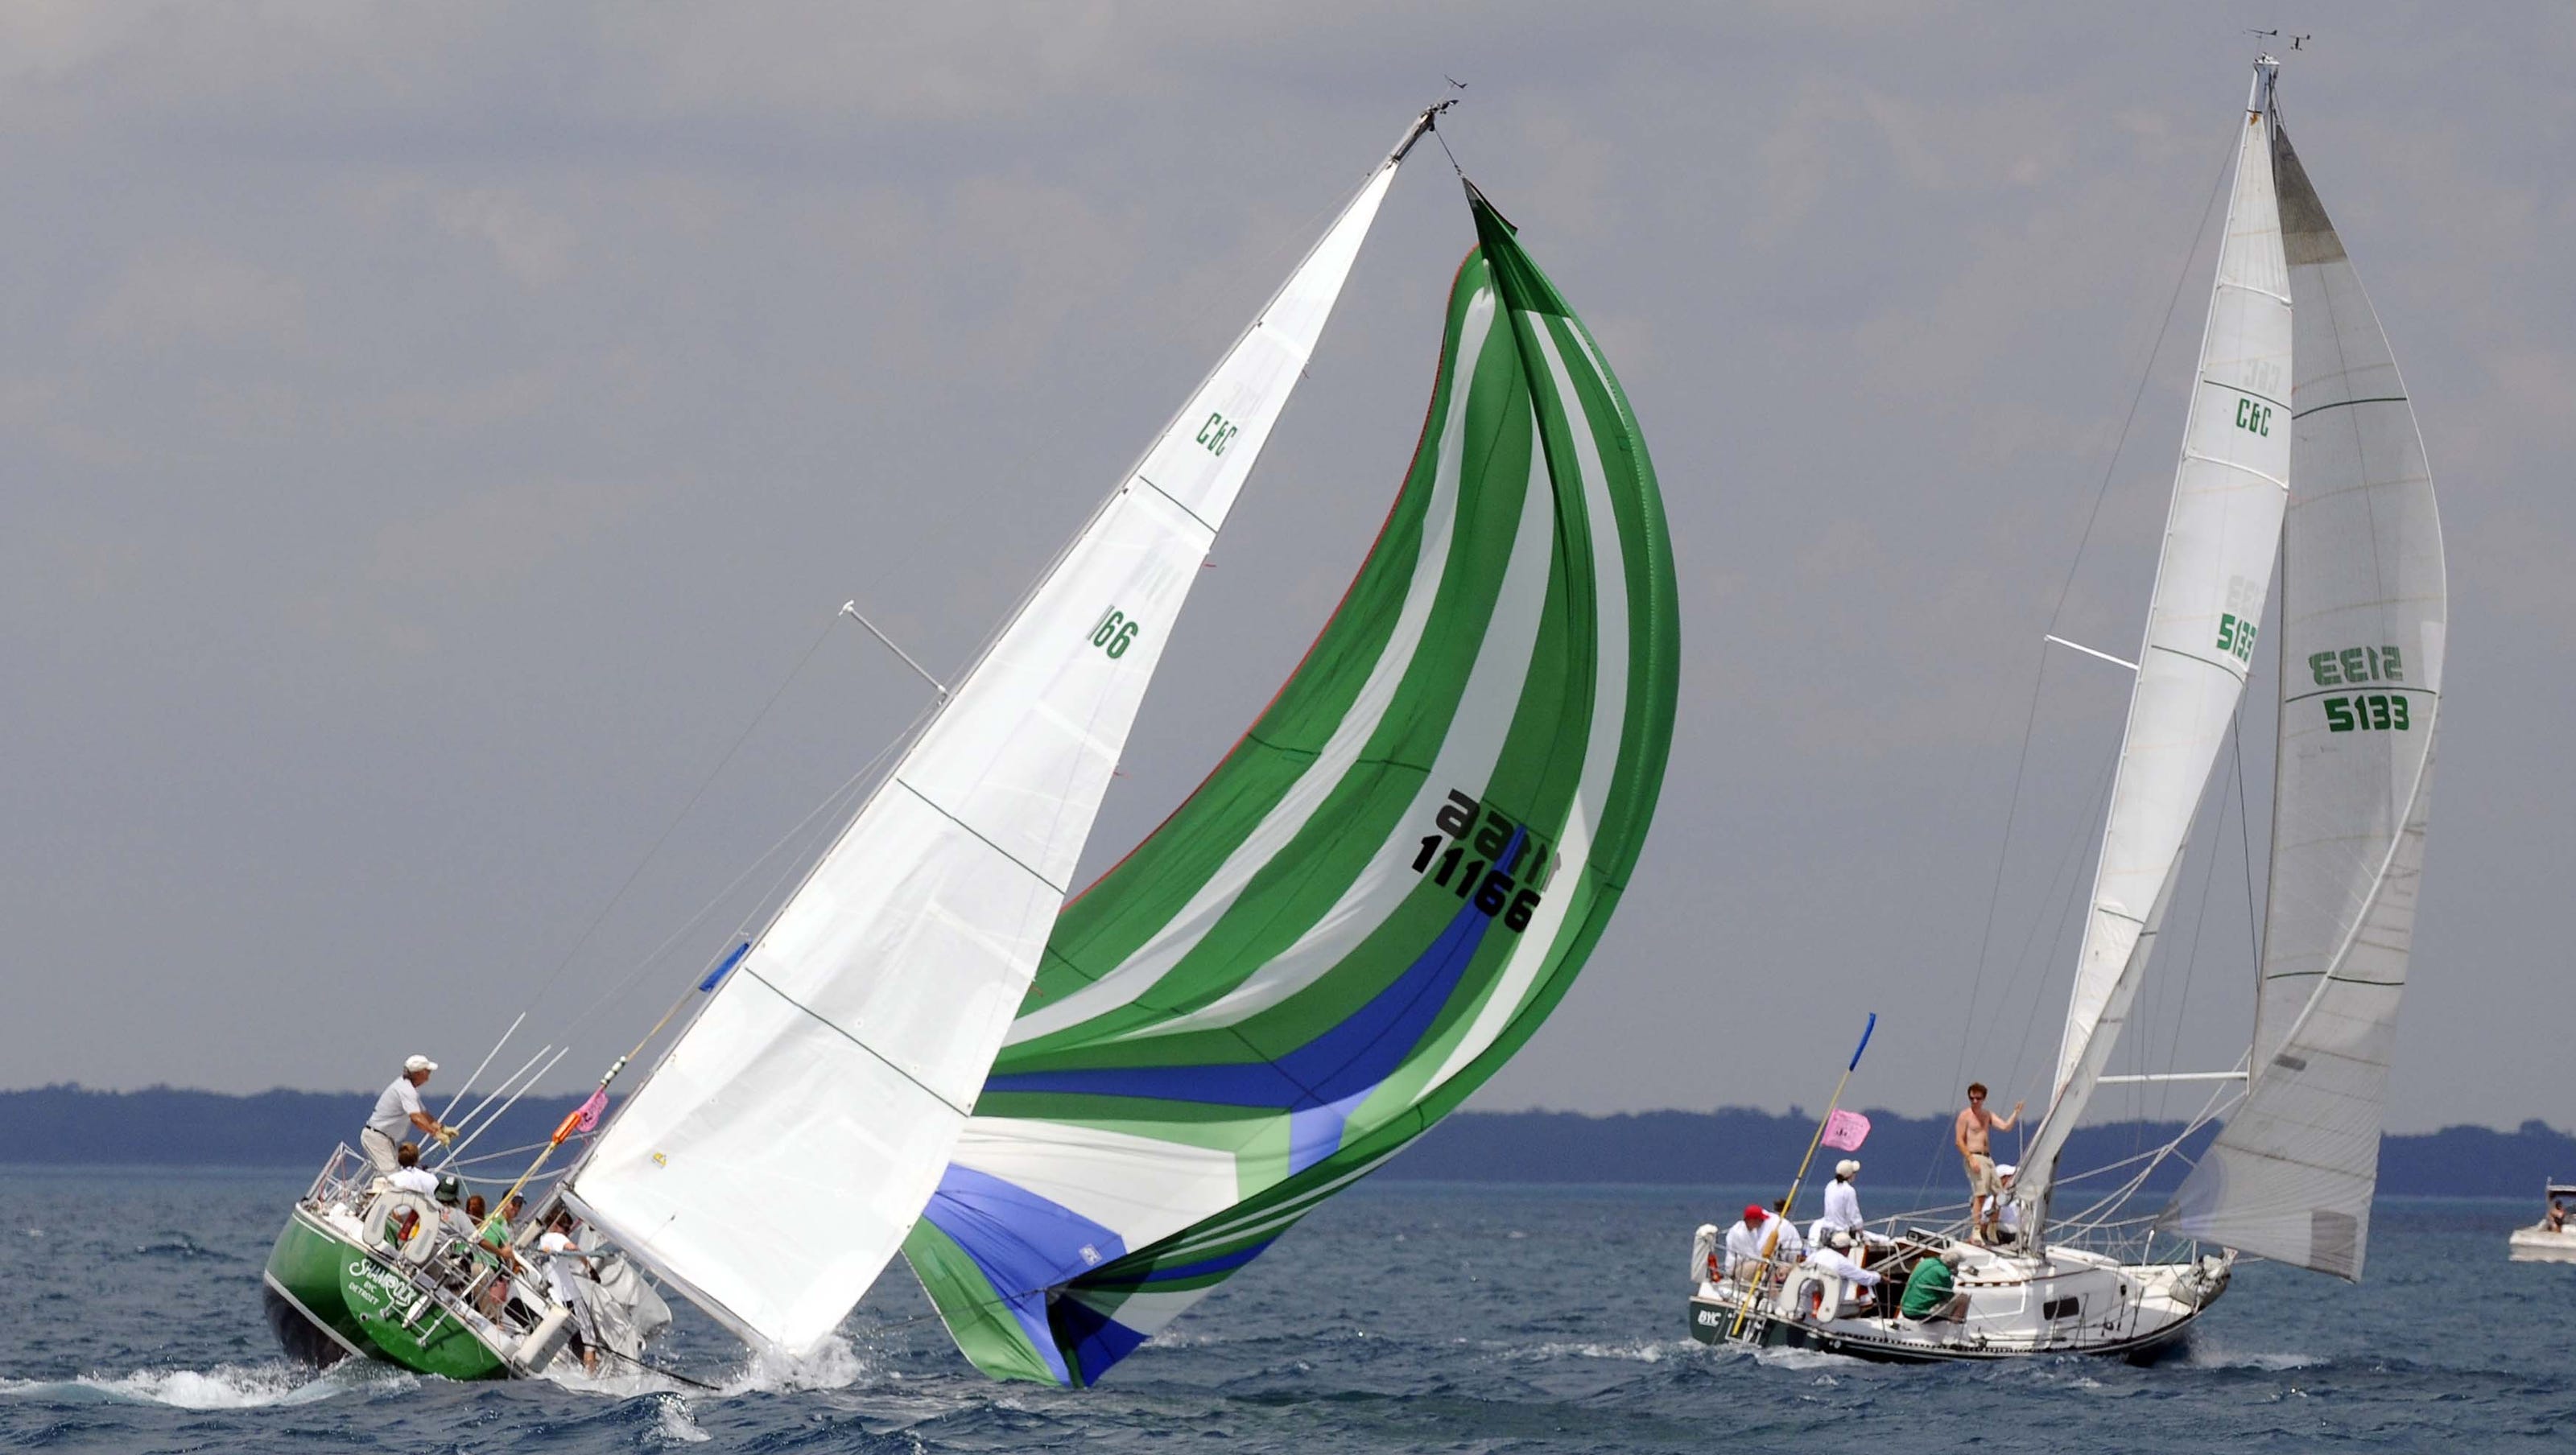 Mackinac race will see changes in sailboat rating system